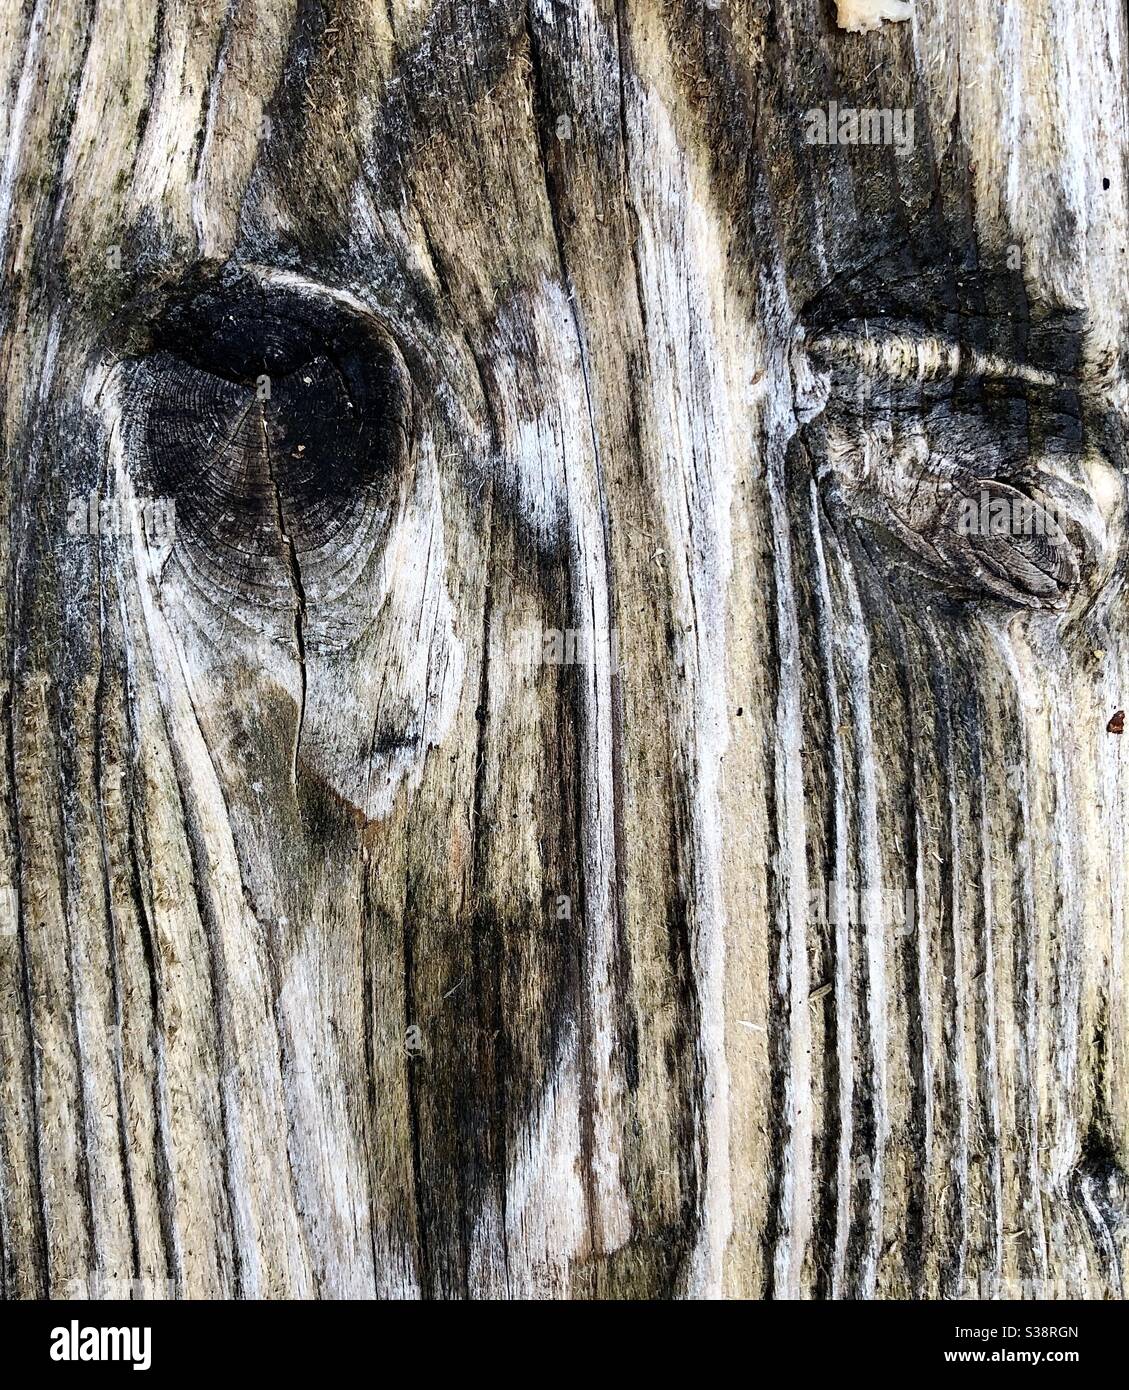 Weathered wood grain and knots resembling an animal’s face. Stock Photo